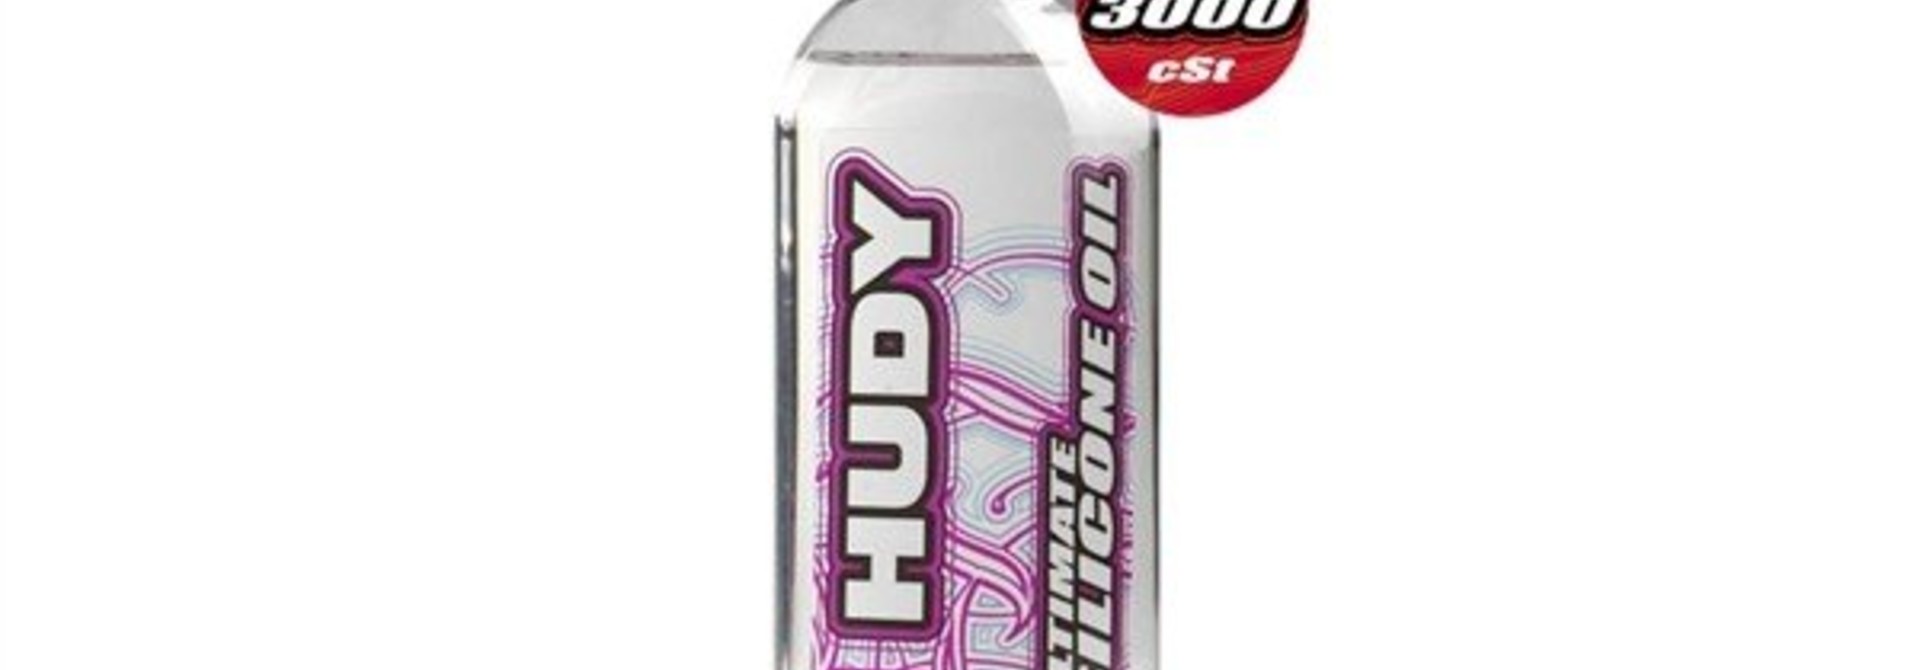 HUDY ULTIMATE SILICONE OIL 3000 cSt - 100ML. H106431